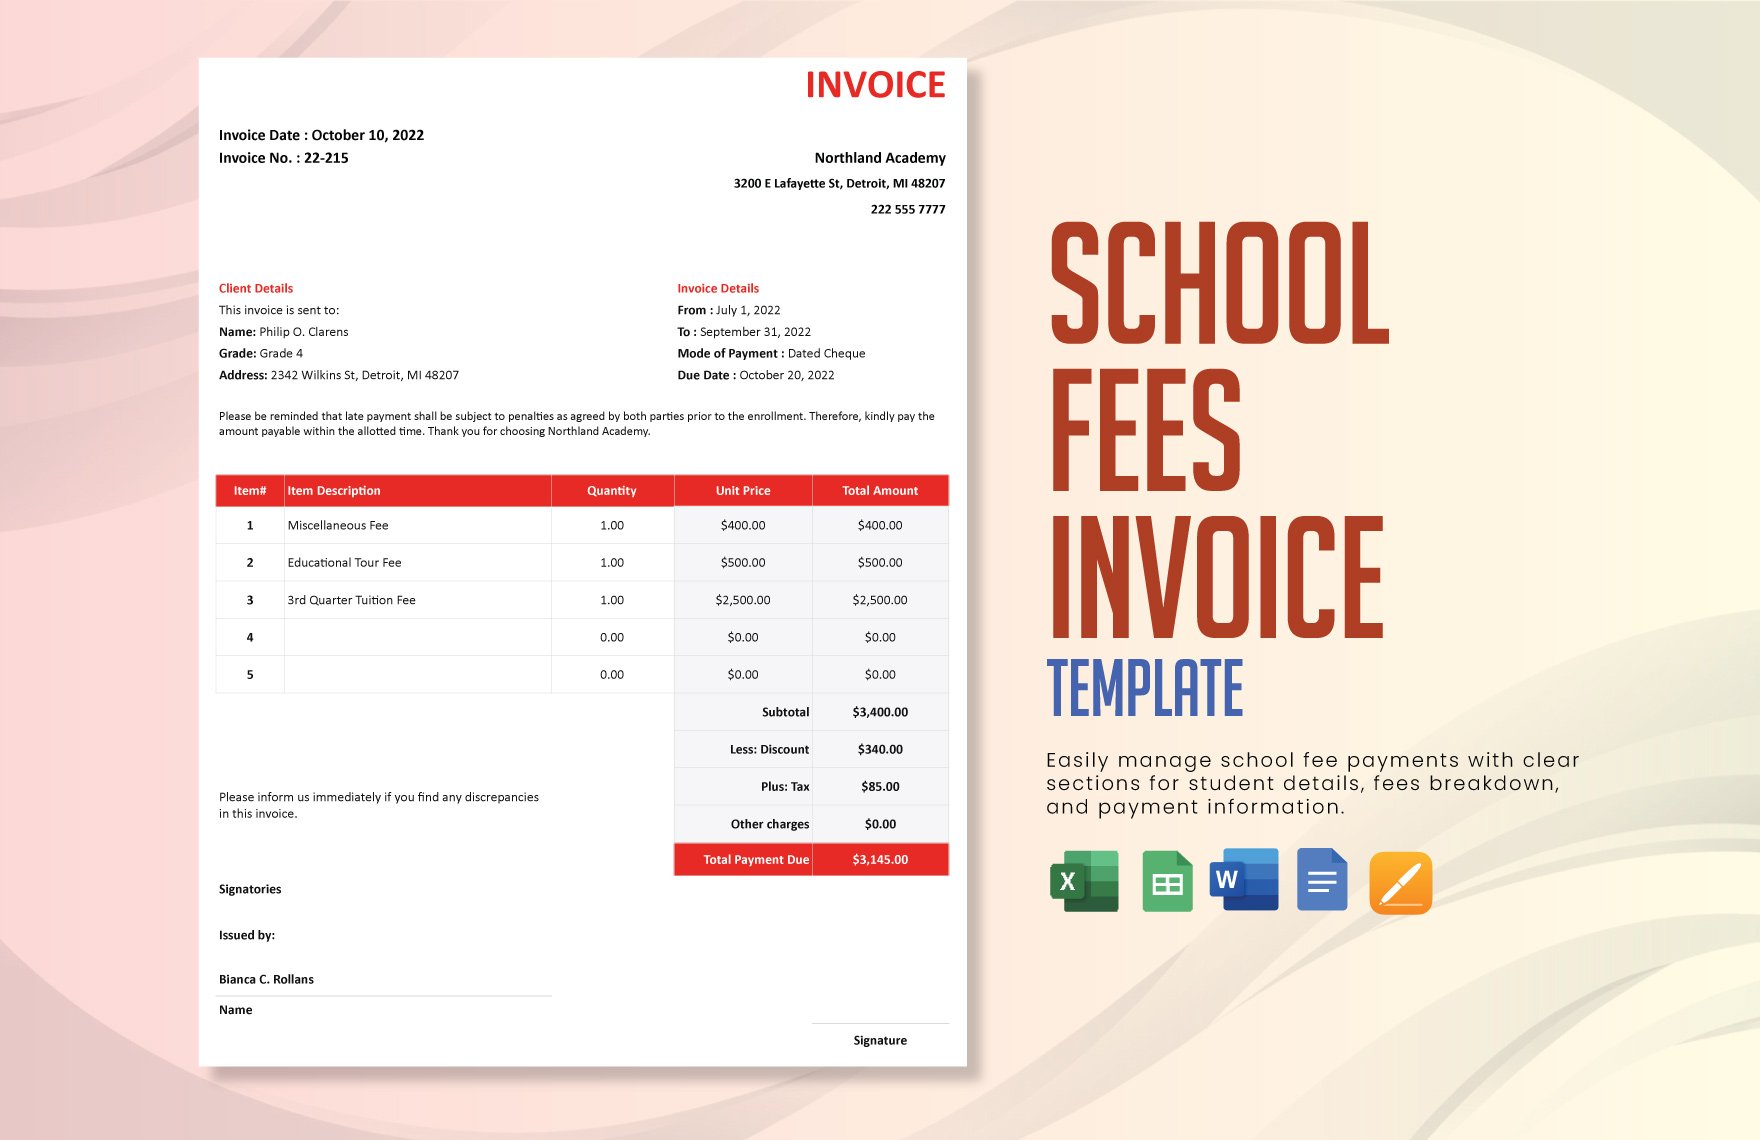 School Fees Invoice Template in Word, Google Docs, Excel, Google Sheets, Apple Pages